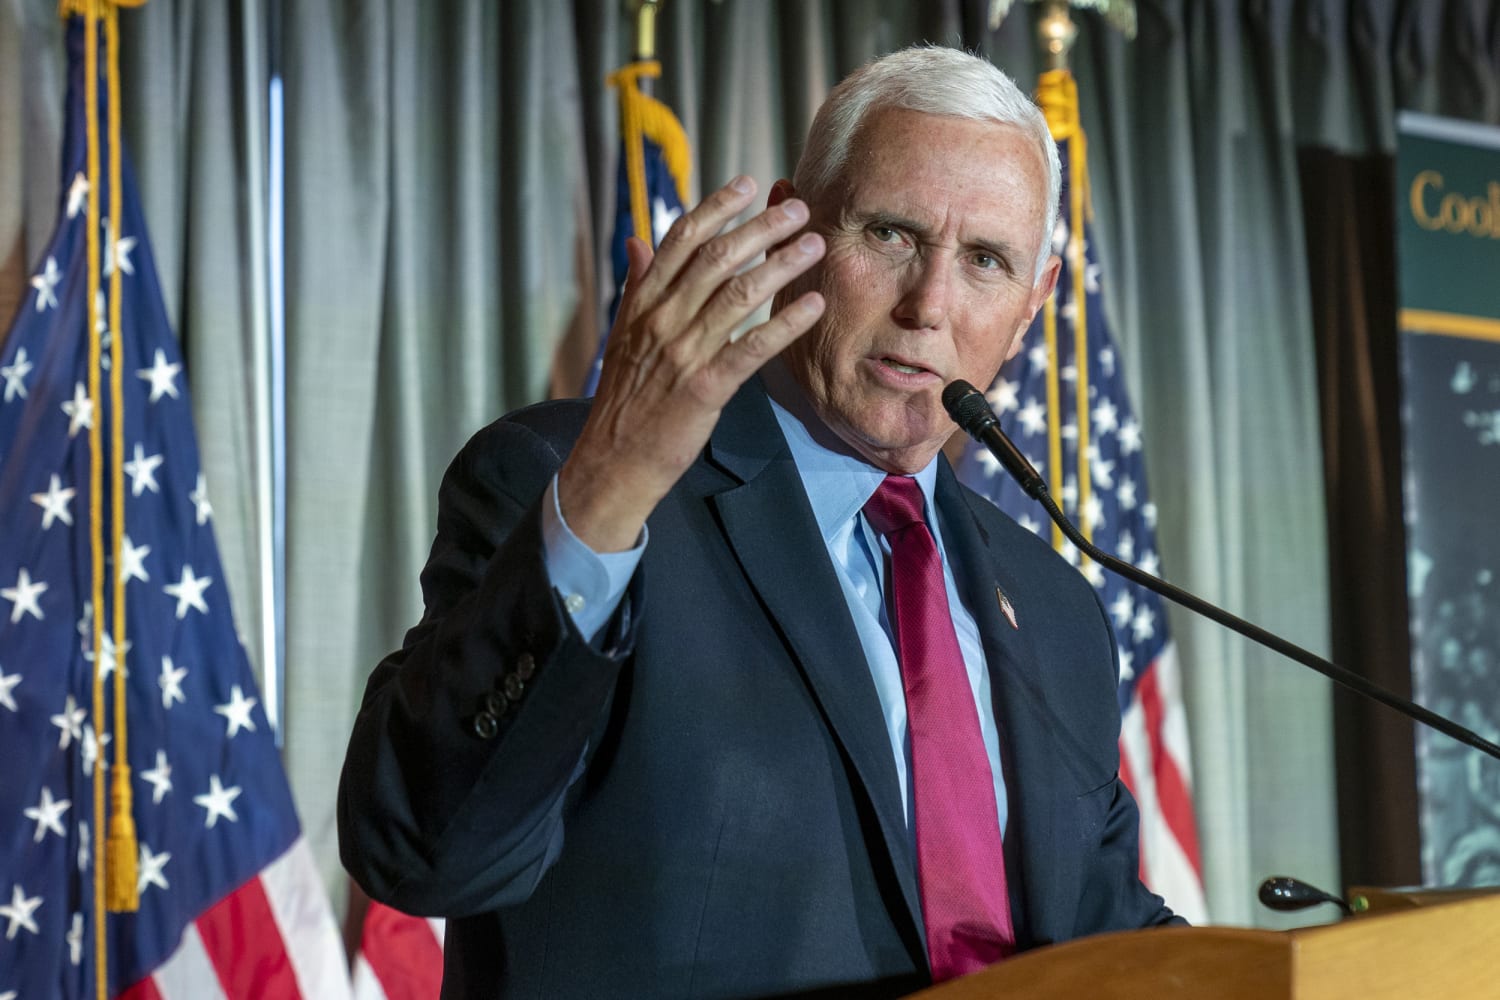 No ‘apologists for Putin’: Pence draws contrast with DeSantis on support for Ukraine